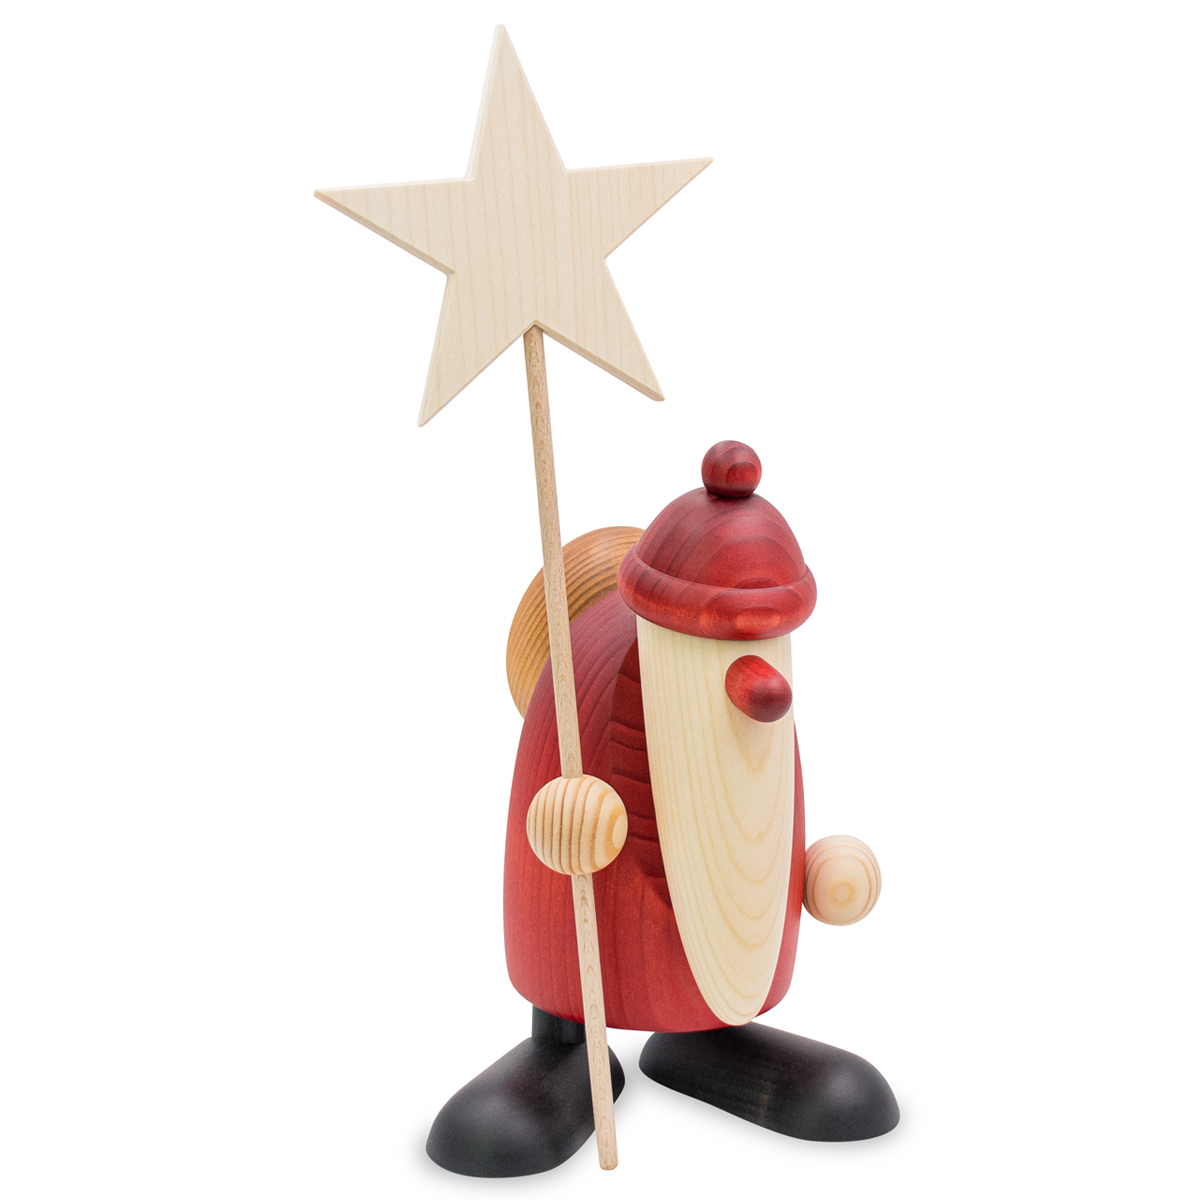  Santa Claus with star, large